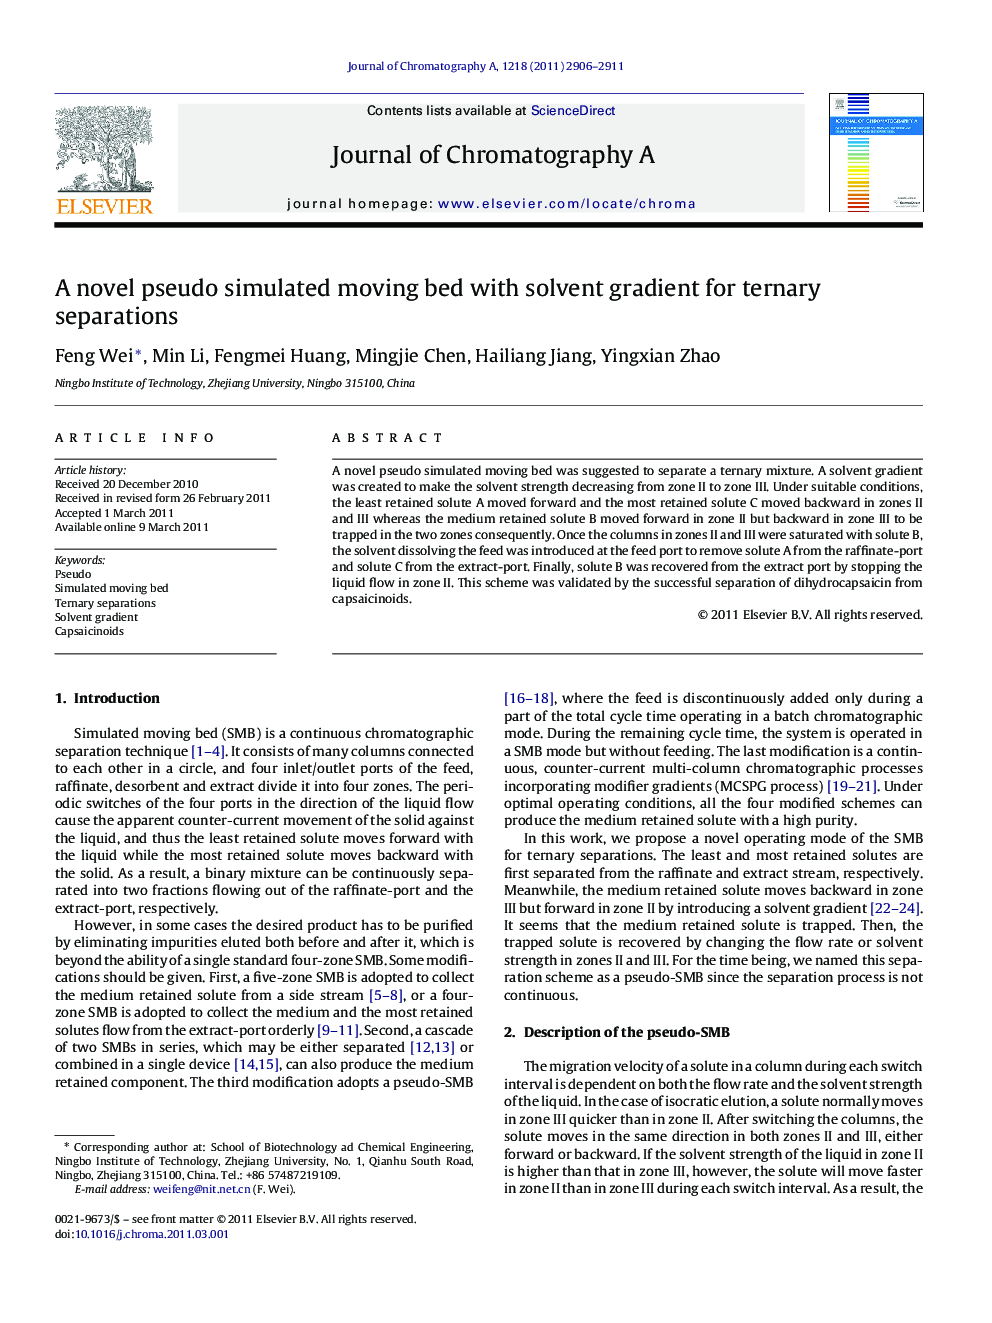 A novel pseudo simulated moving bed with solvent gradient for ternary separations